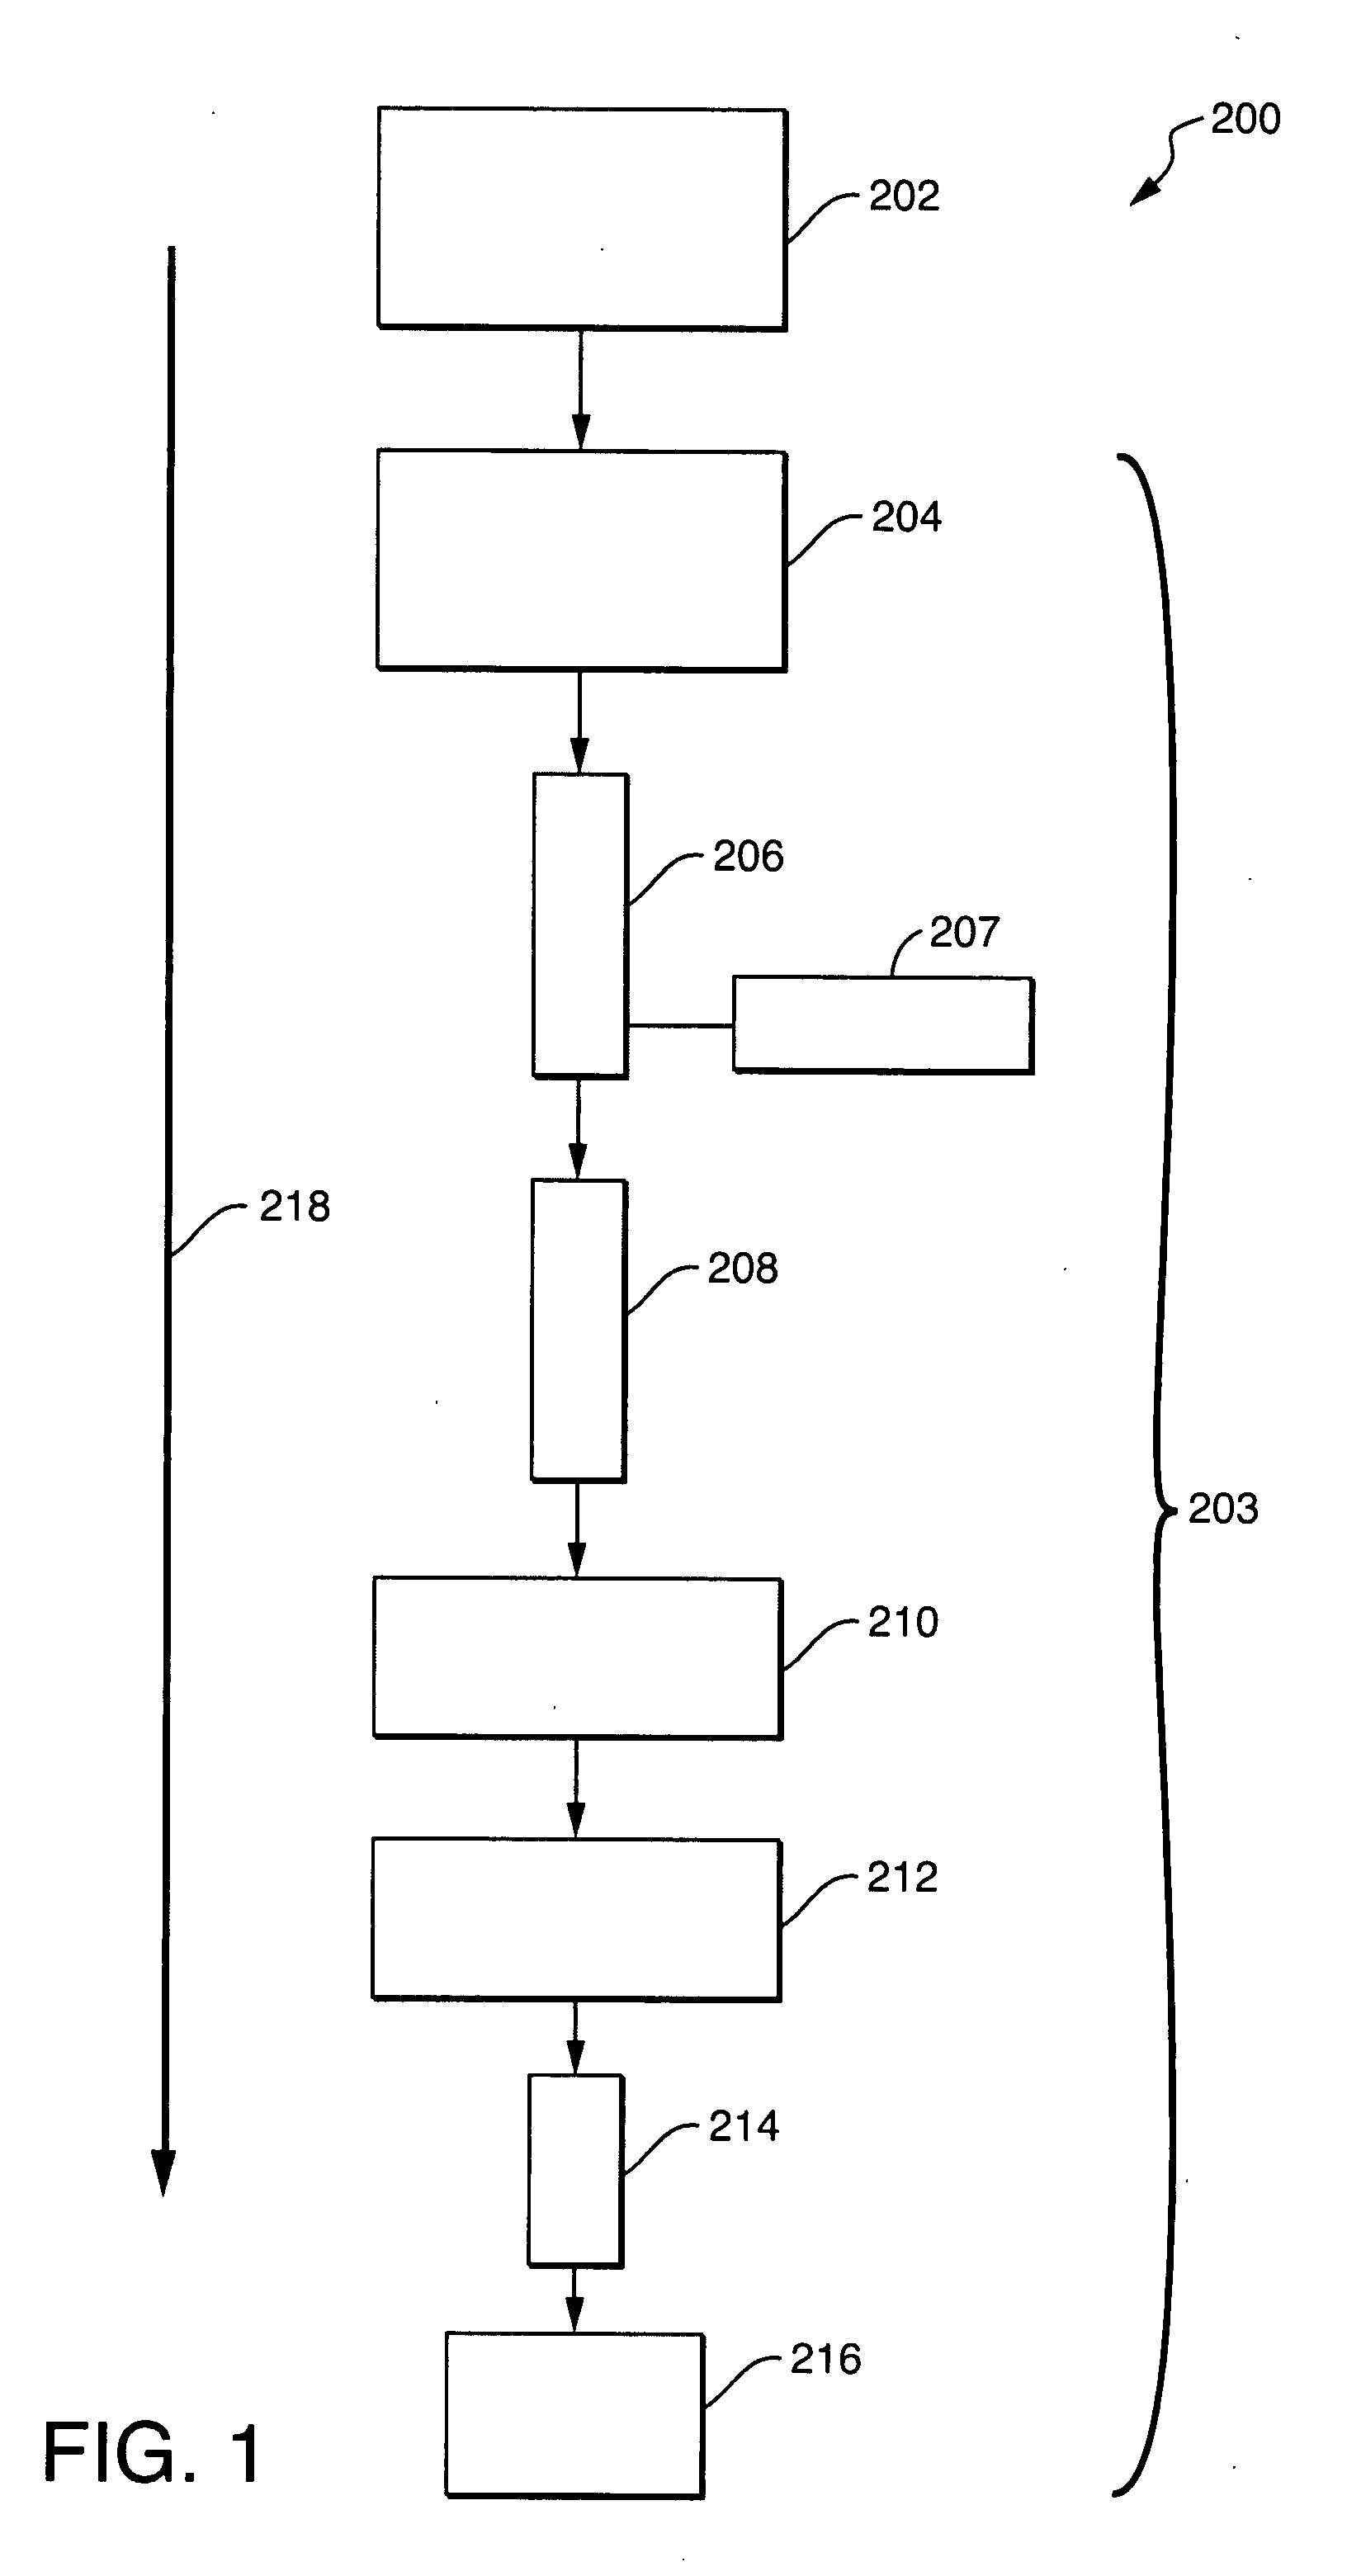 Method for simulating a system having multiple failure modes